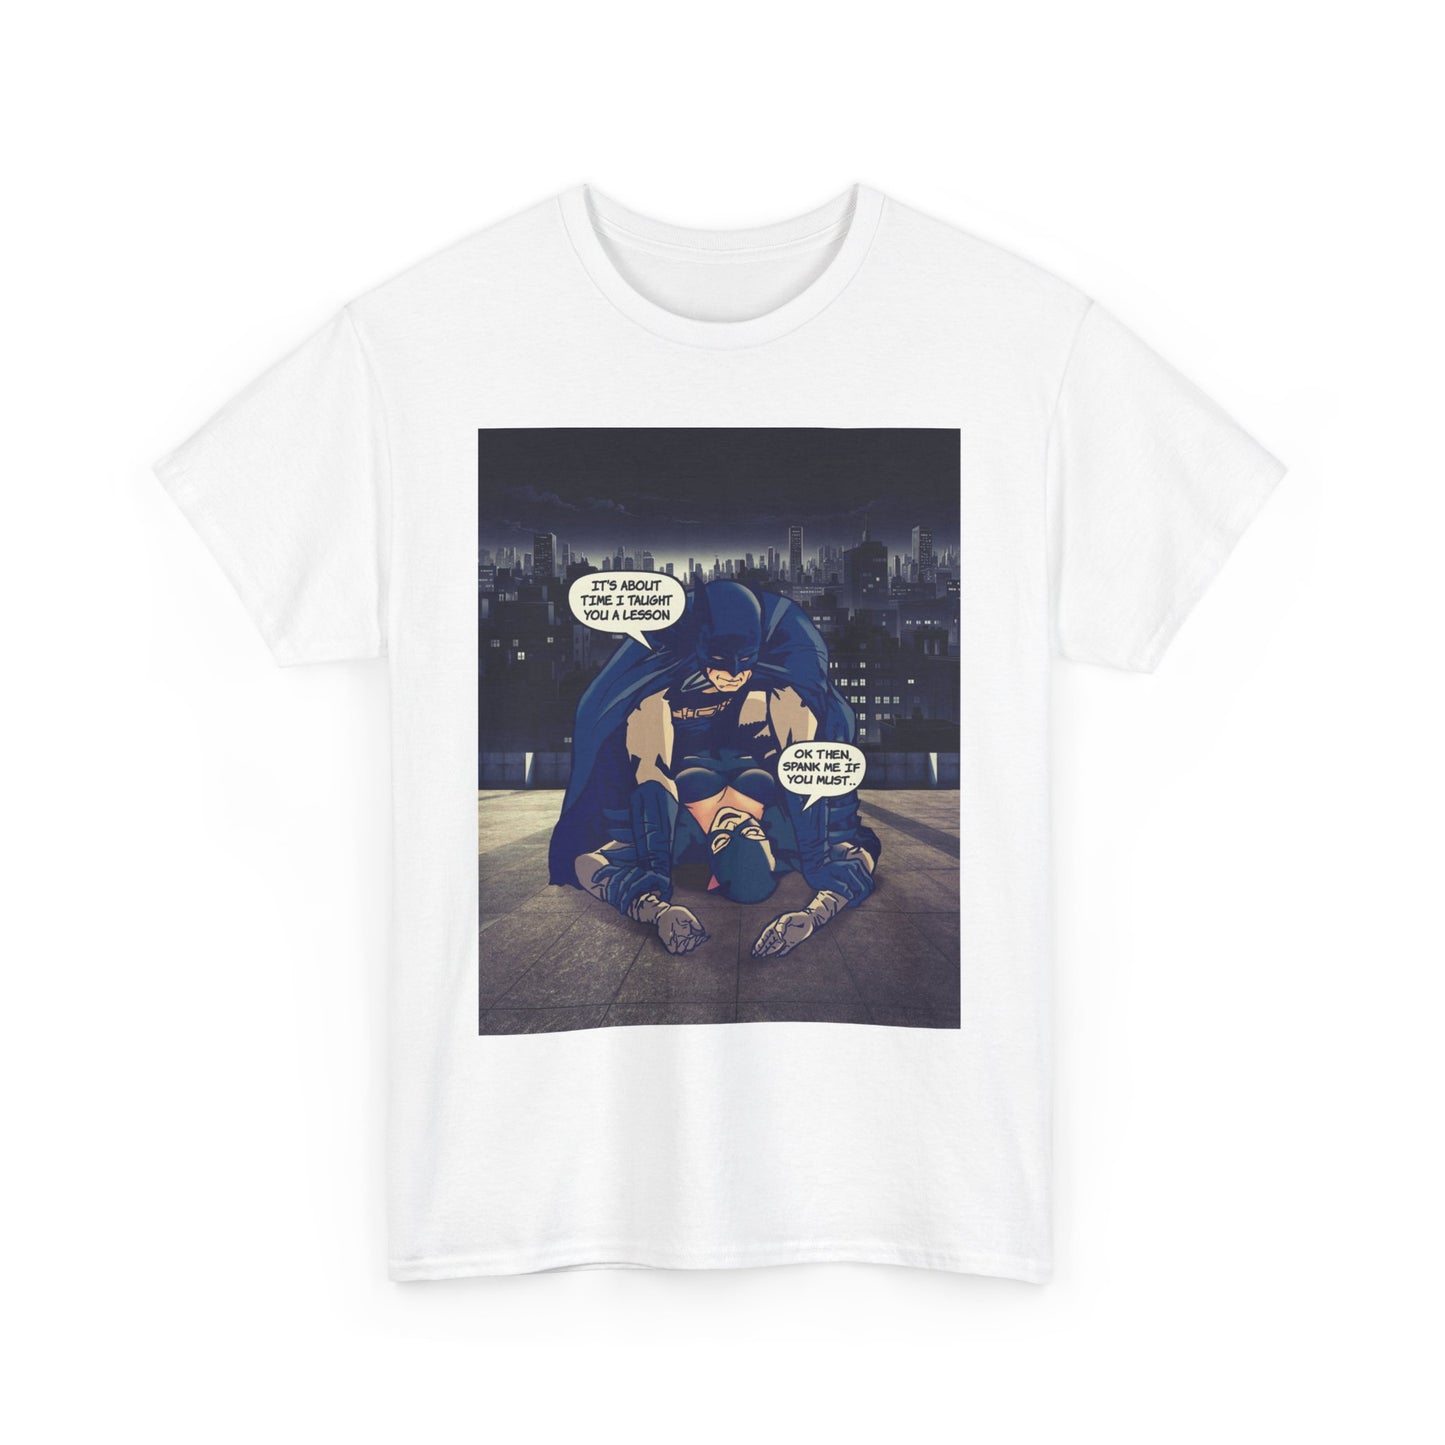 I Want You Now - Bat & Cat Tee